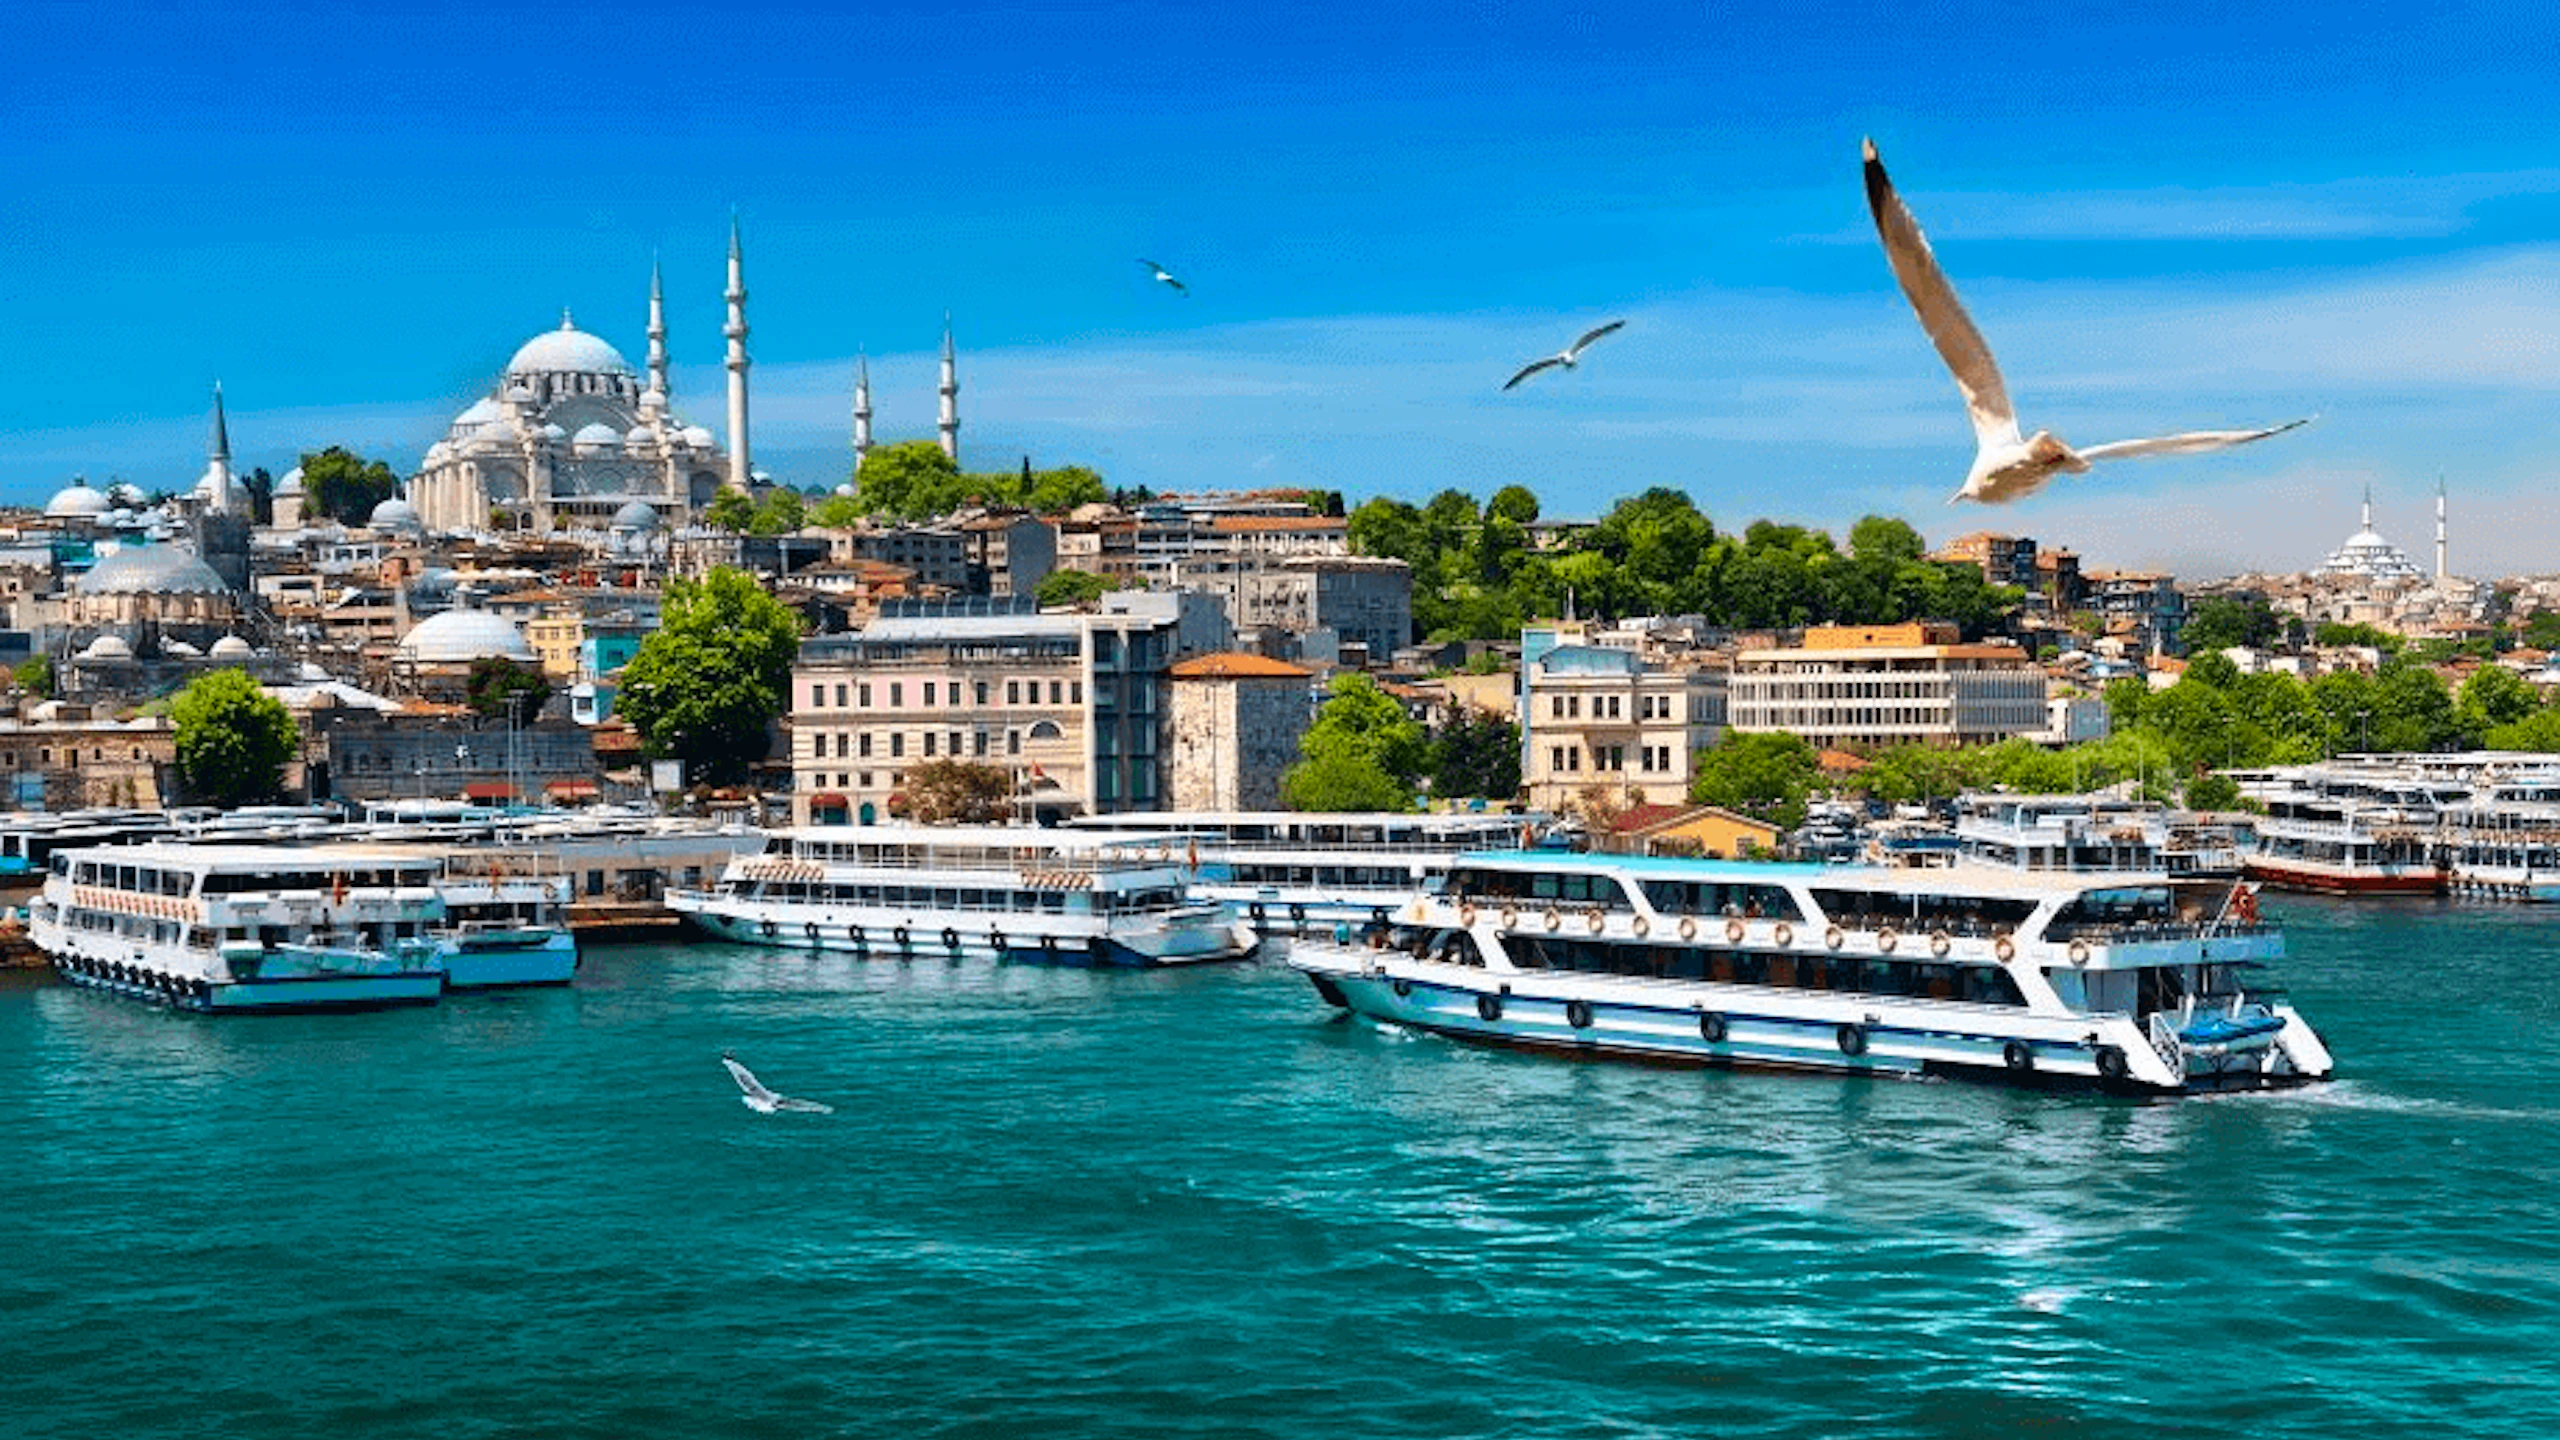 Bosphorus Cruise with Asian Side & Dolmabahce Palace Category